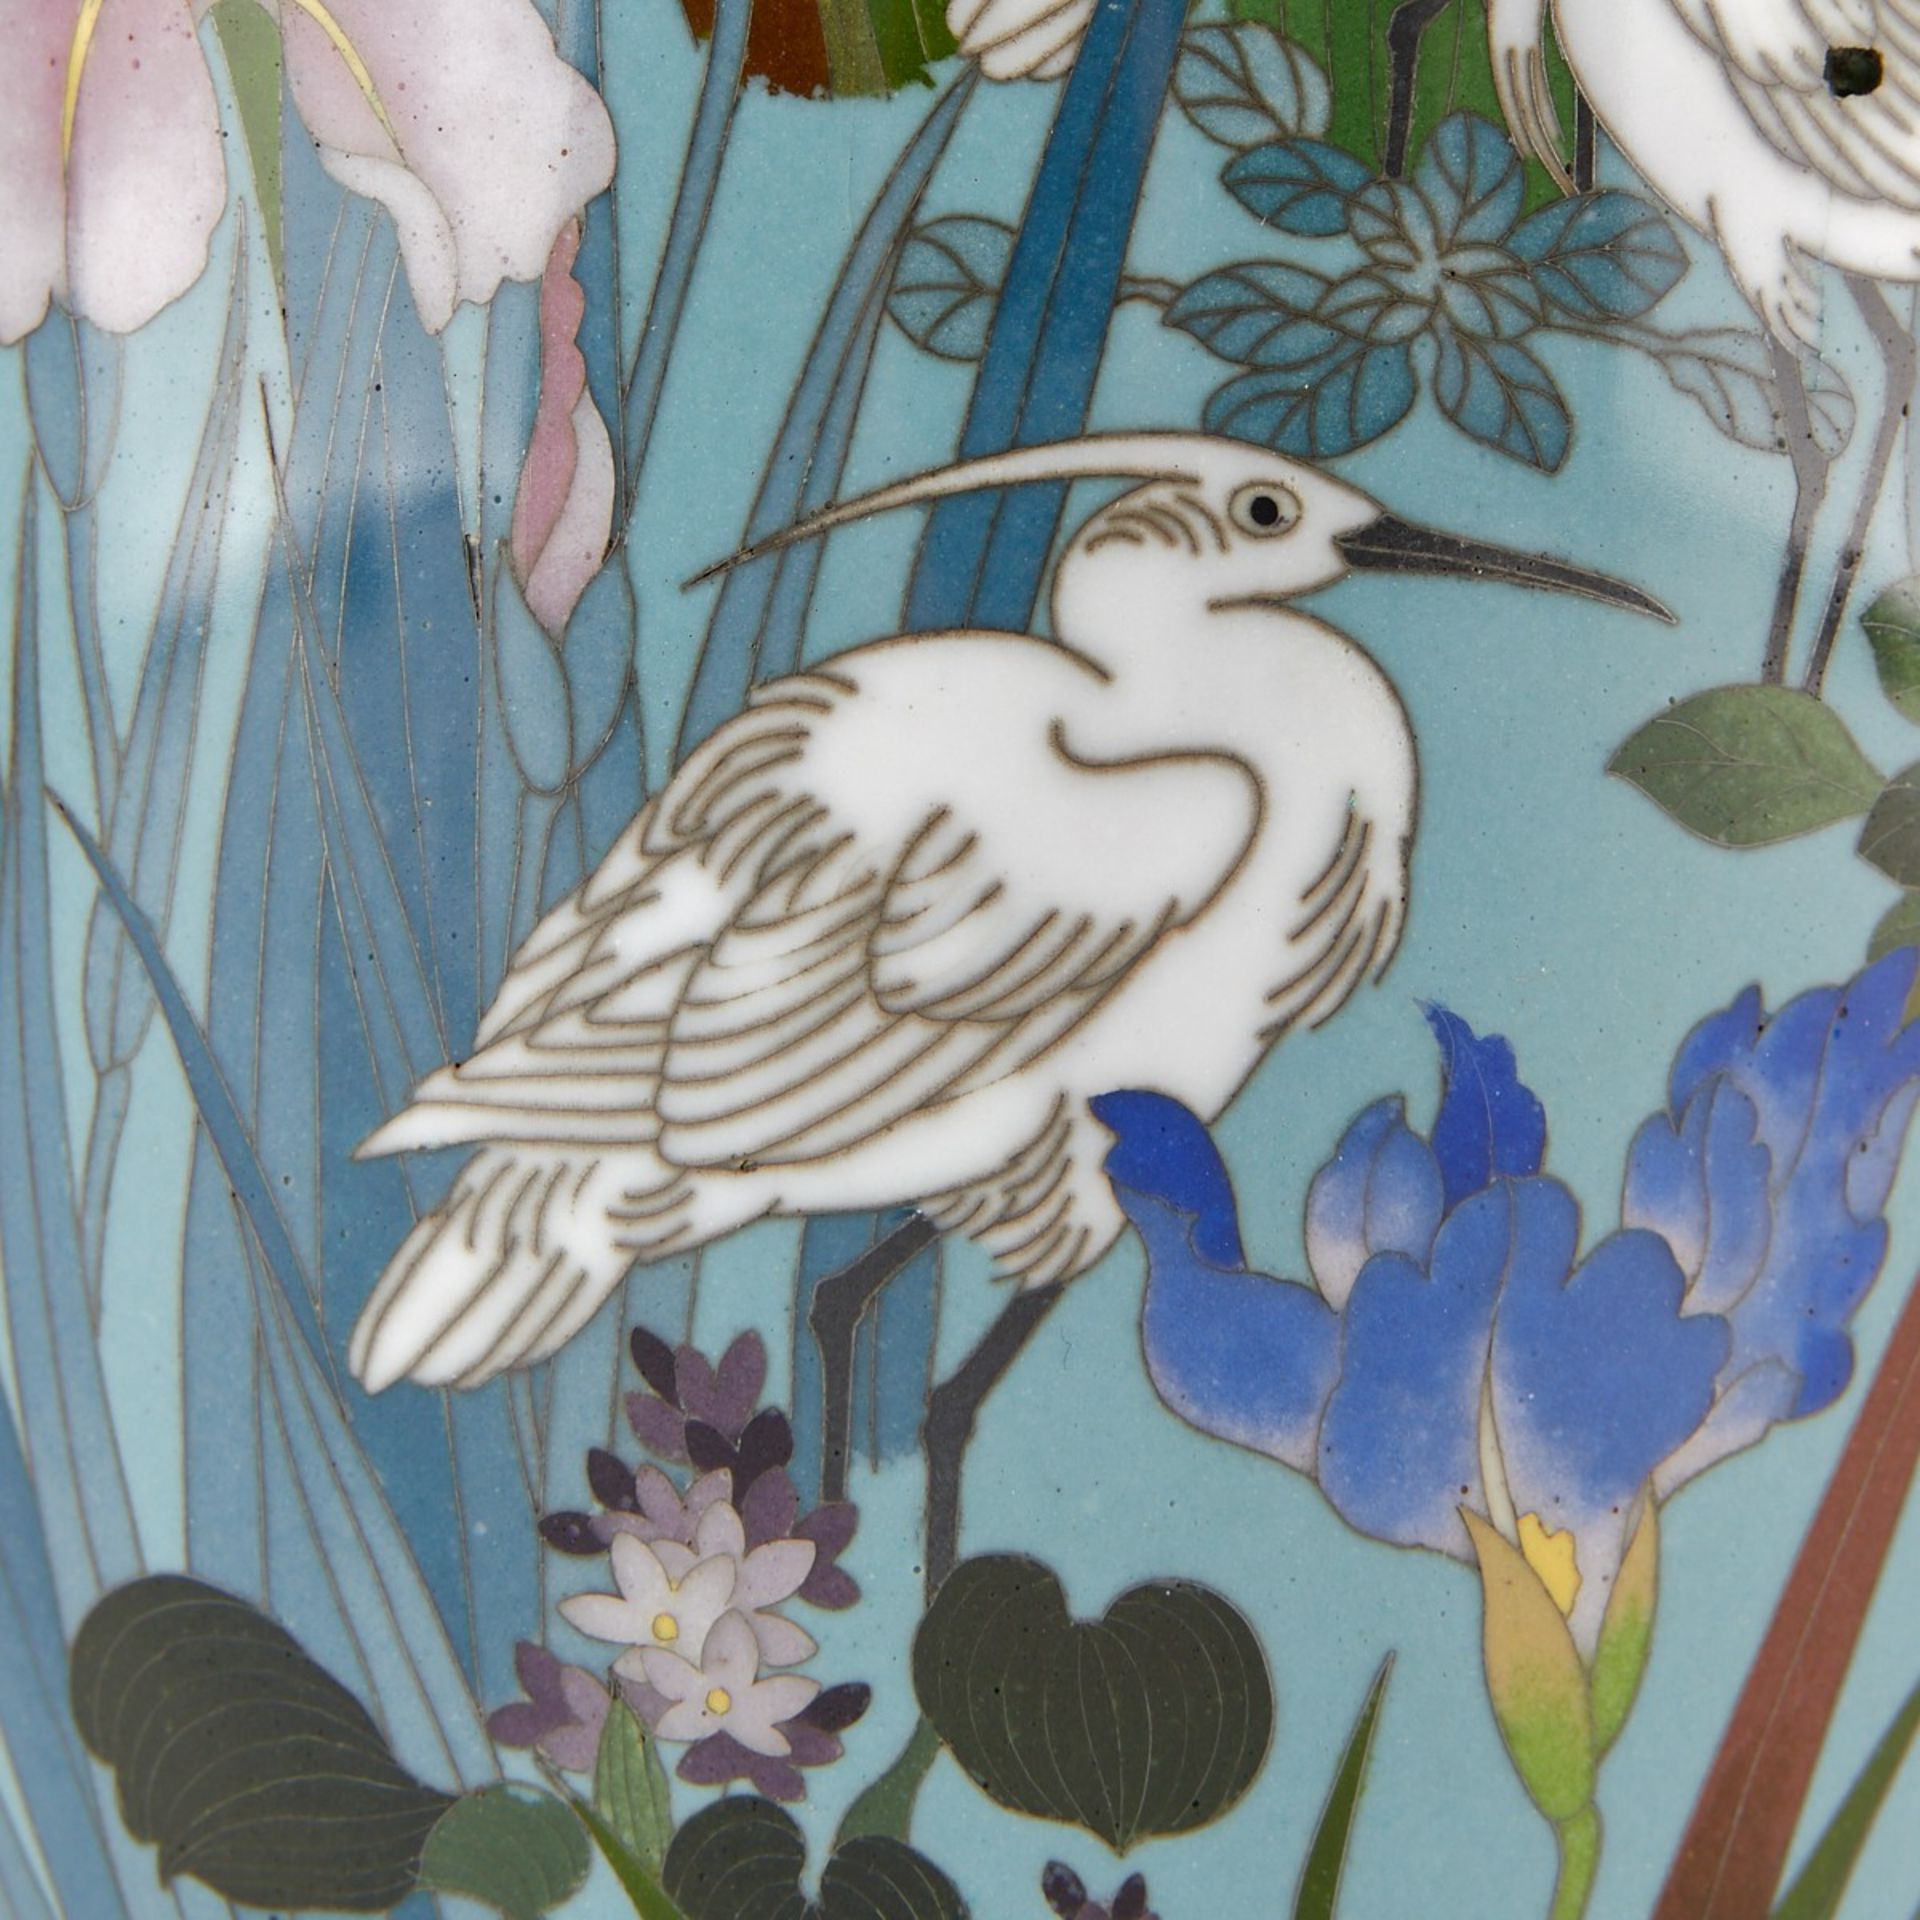 Japanese Cloisonne Vase Cranes and Flowers - Image 6 of 7